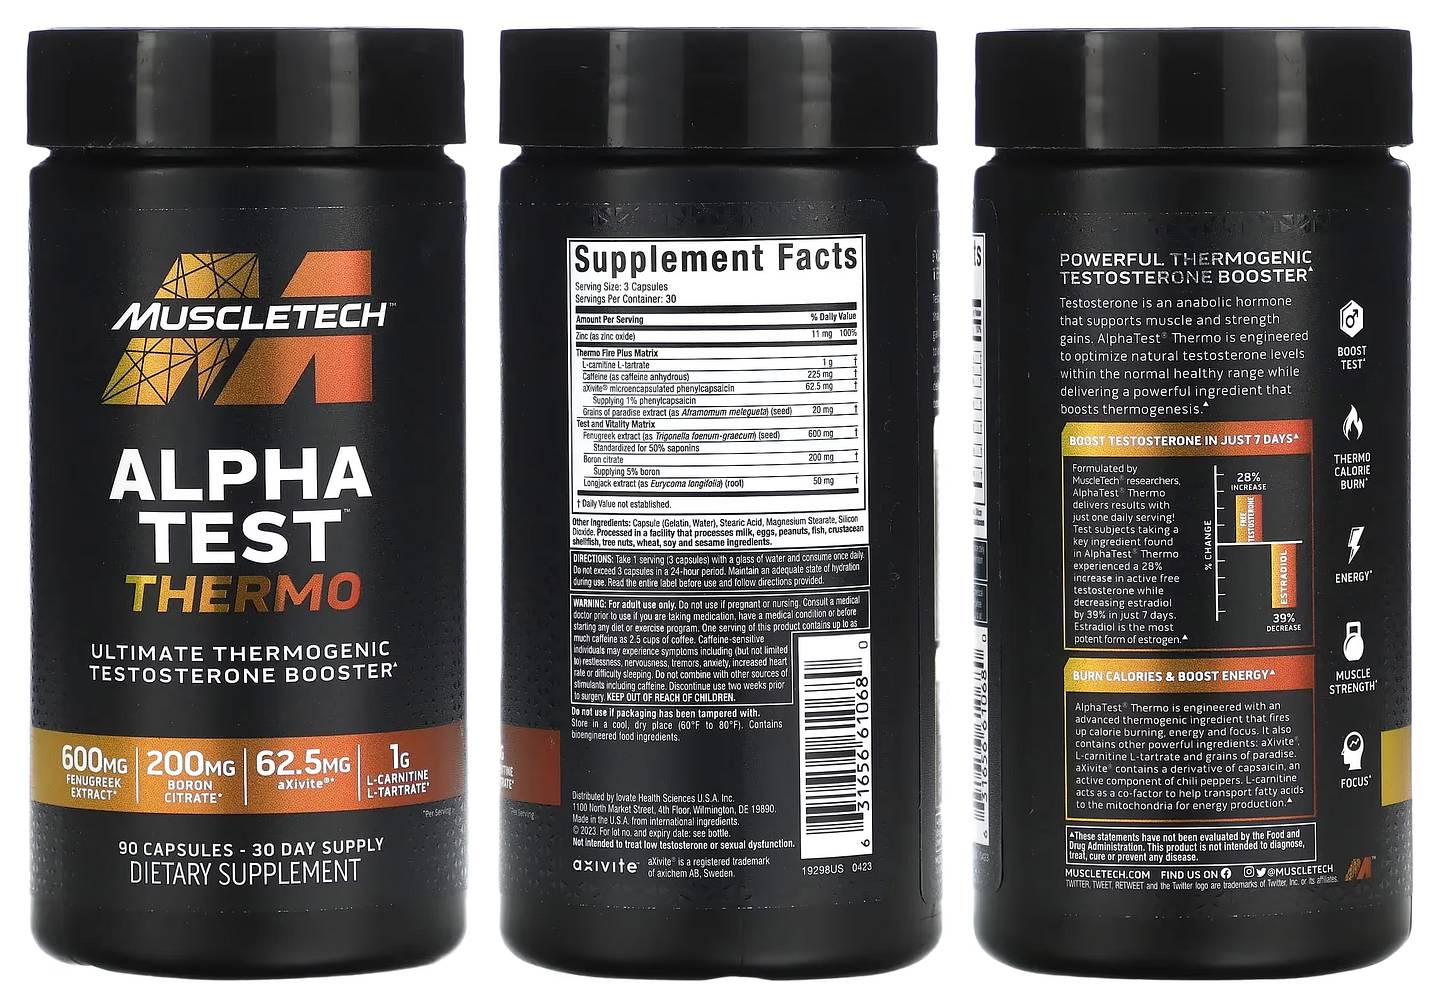 MuscleTech, Alpha Test Thermo packaging